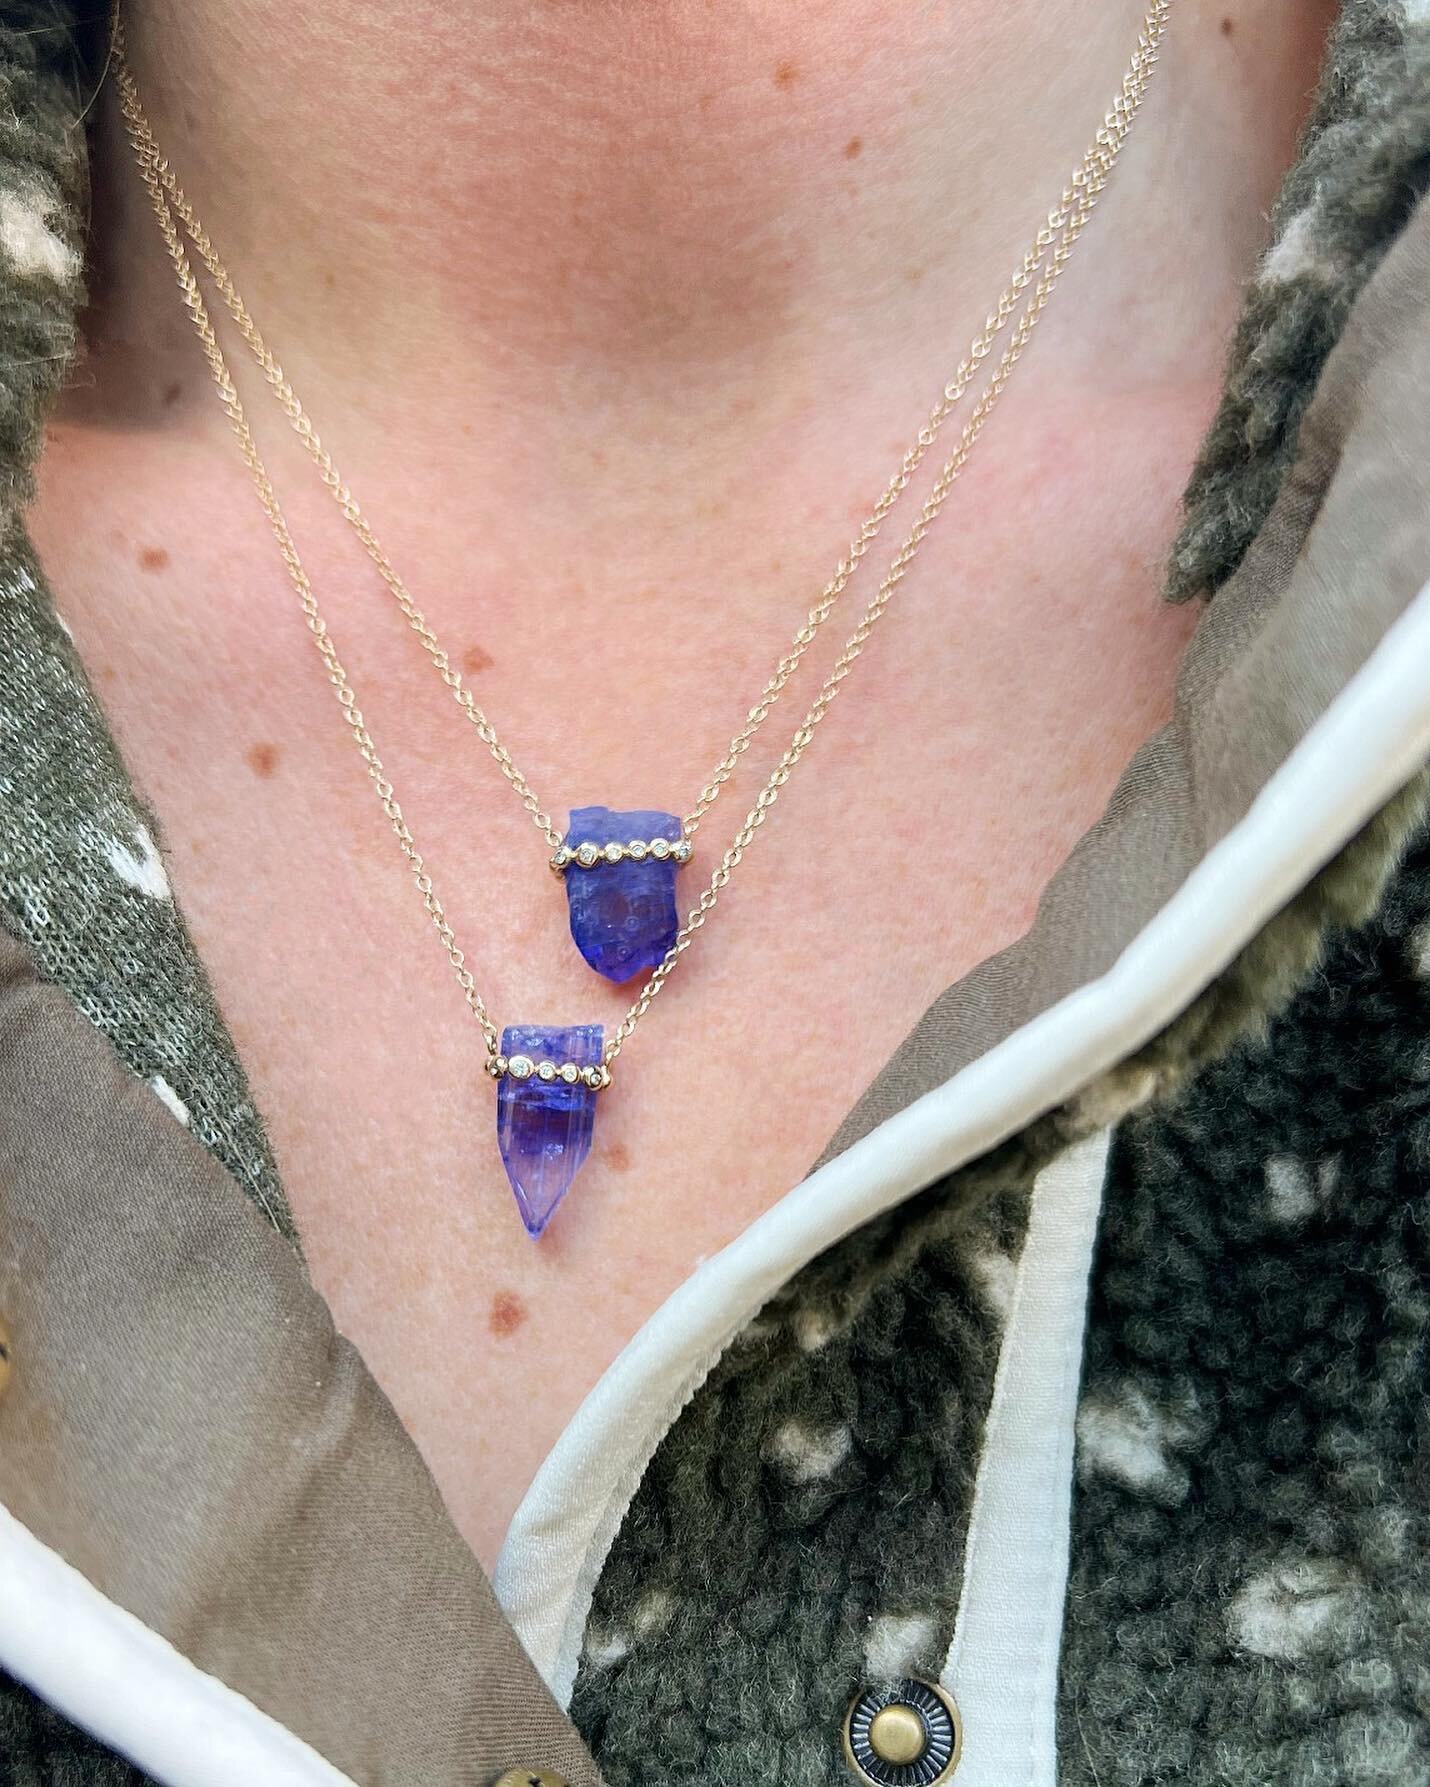 The color of these tanzanite crystals! 😍💜 Tanzanite : is said to calm an overactive mind and relieve stress and anxiety. It is also used to help detoxify the body.